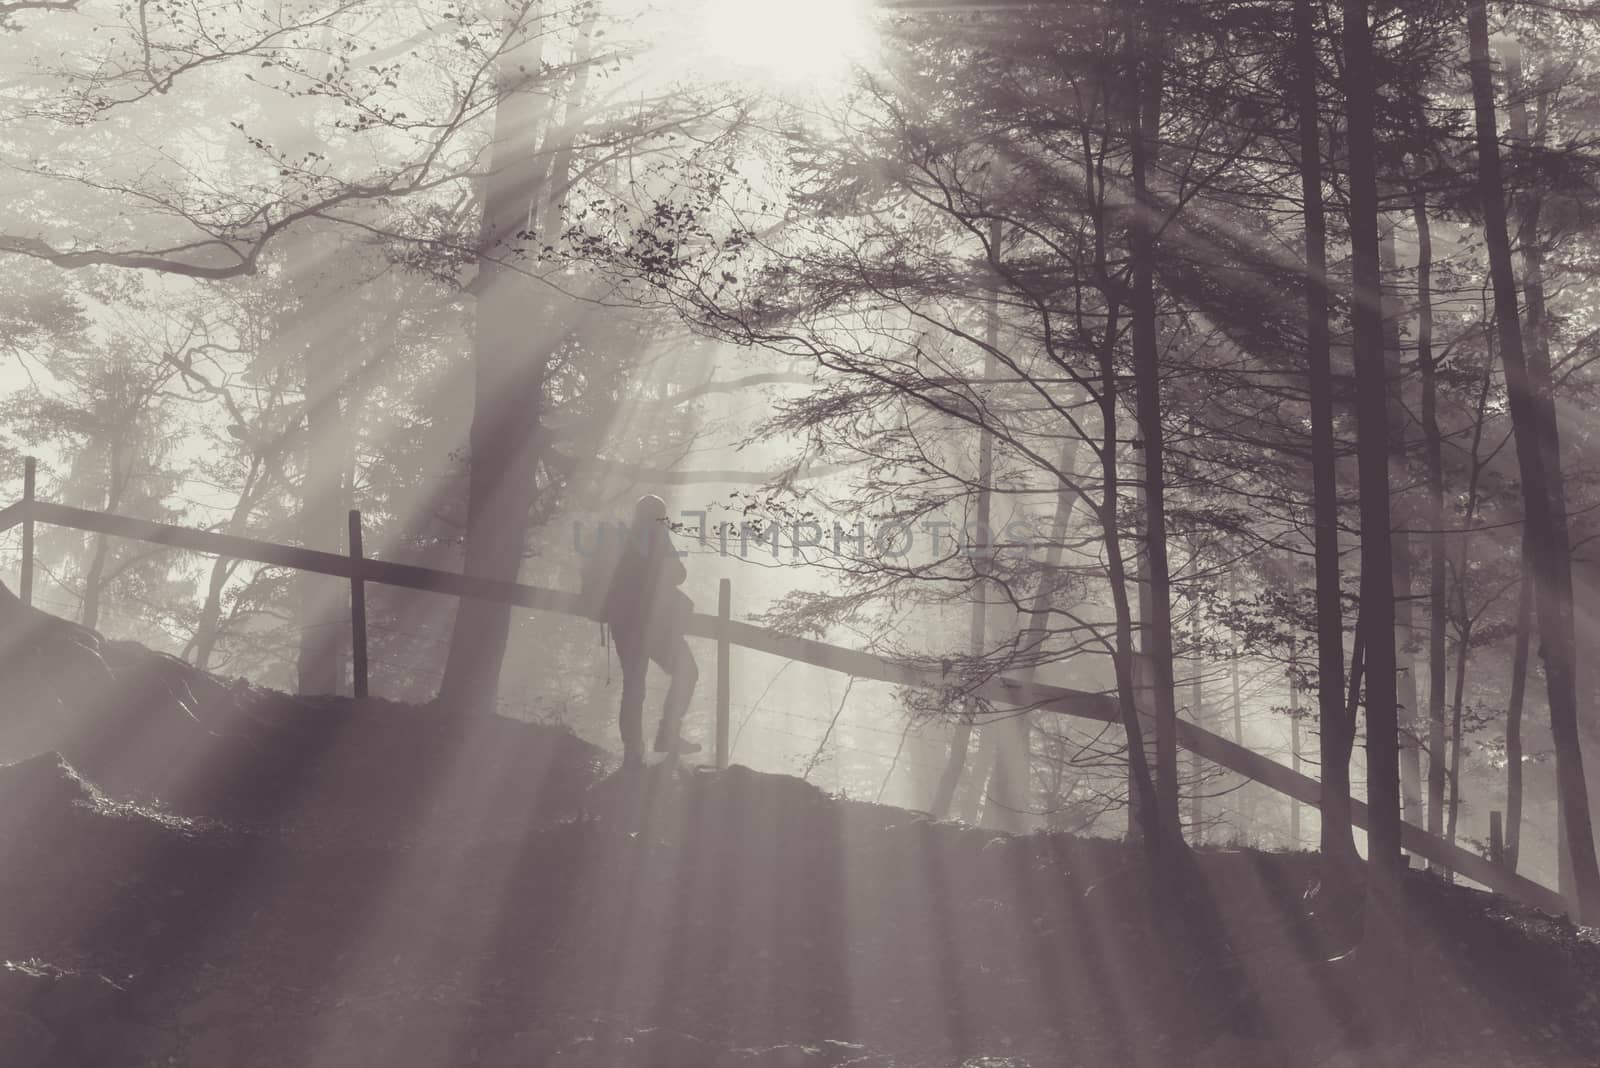 Traveler with backpack staying in forest, near a wooden fence, enjoying the warm sun rays passing through fog